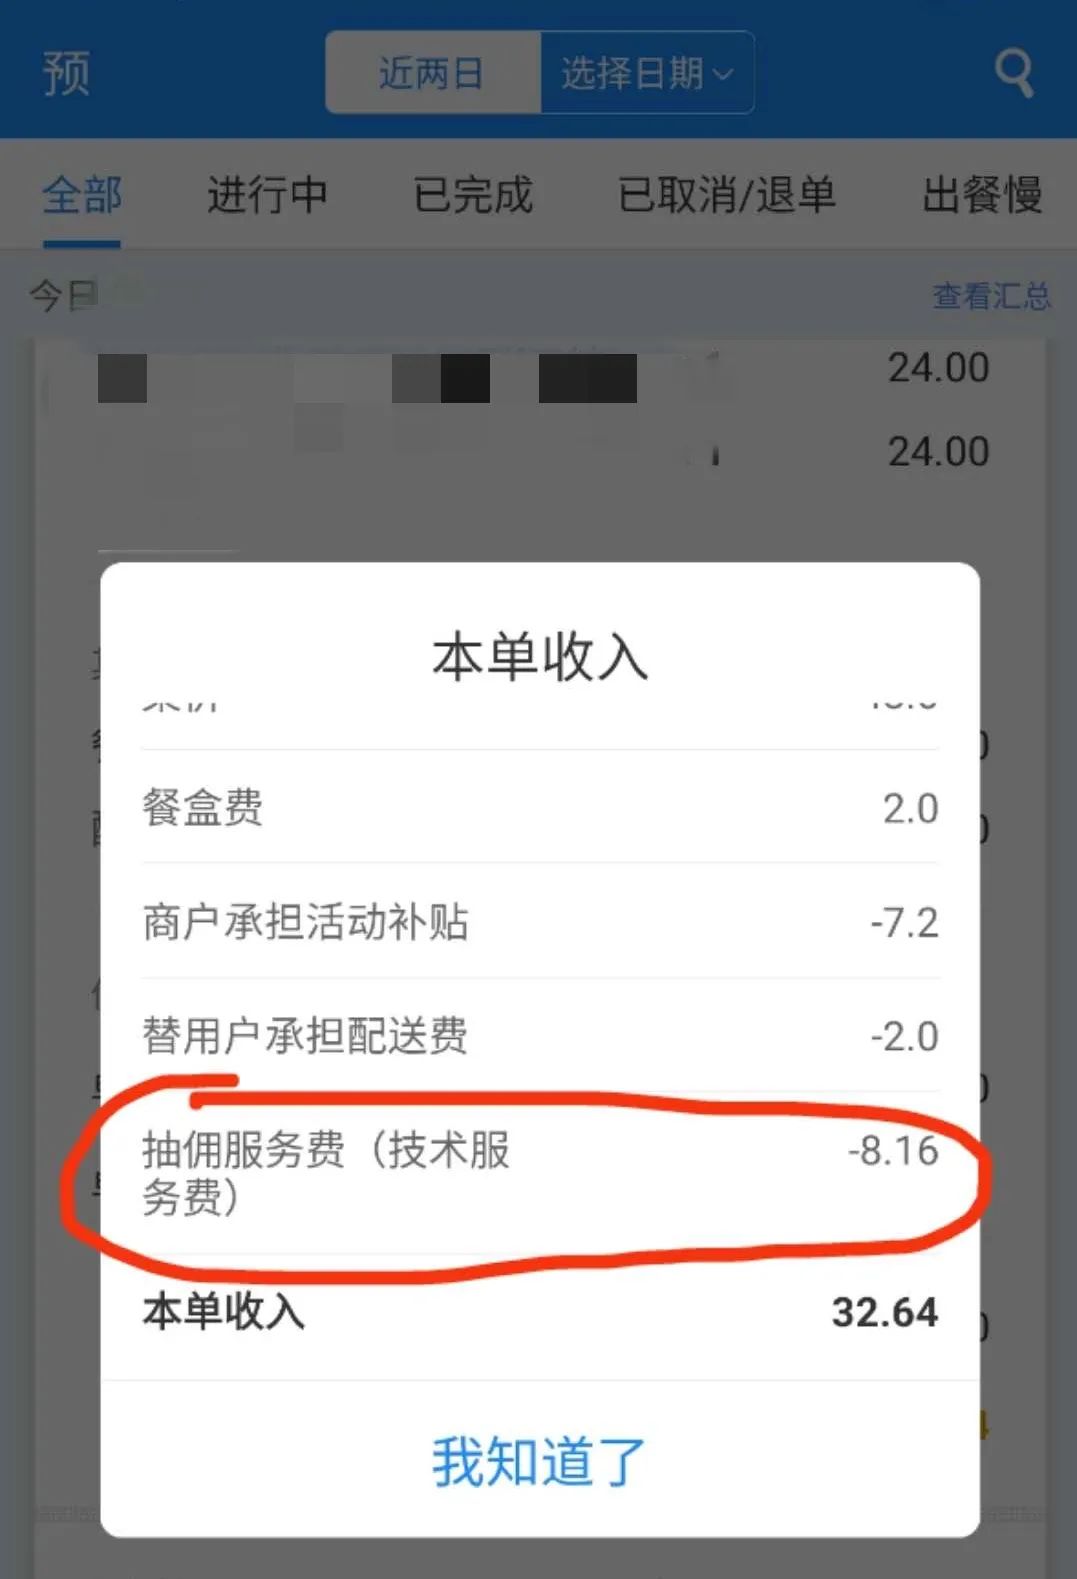 The commission has gone up again? For more than 3,000 drinks, I only earn 1,000 yuan